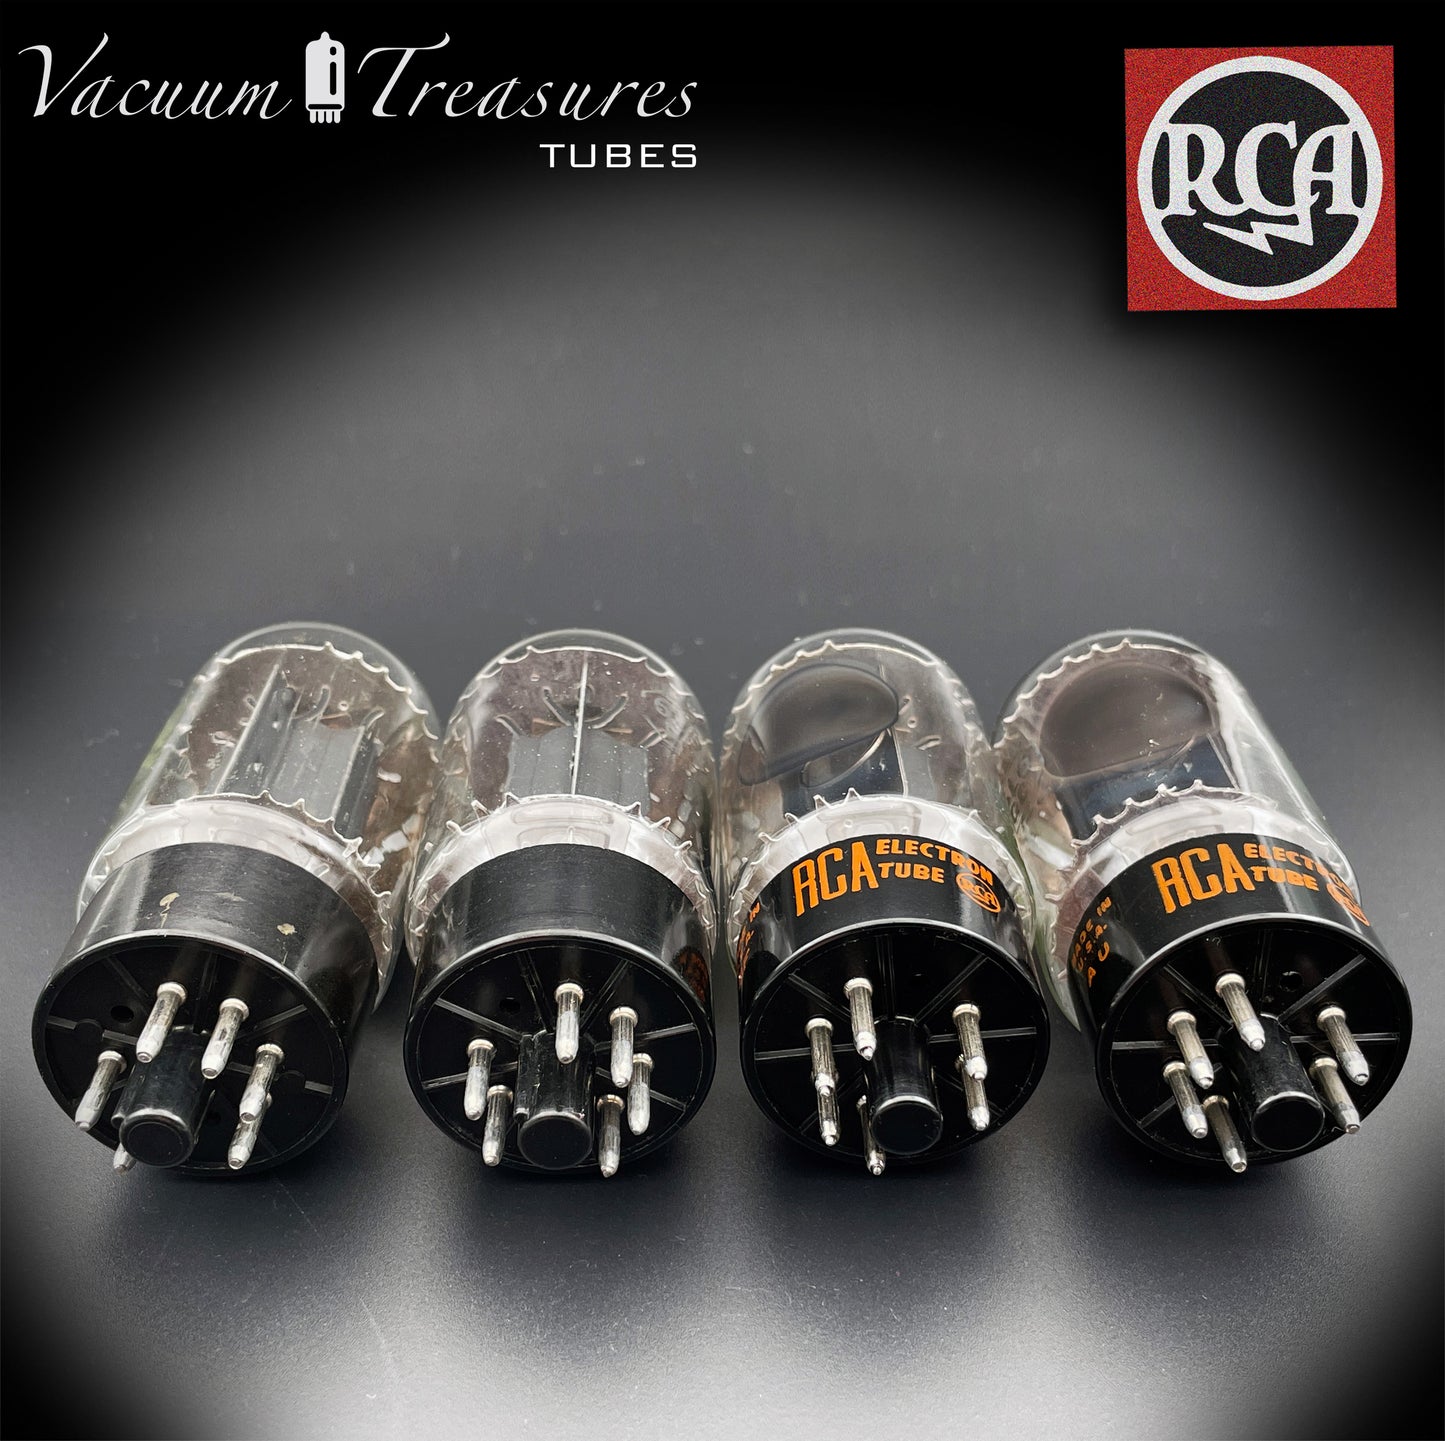 6L6 GC RCA Black Plates Halo Getter Matched Tubes @ Test NOS Made in USA